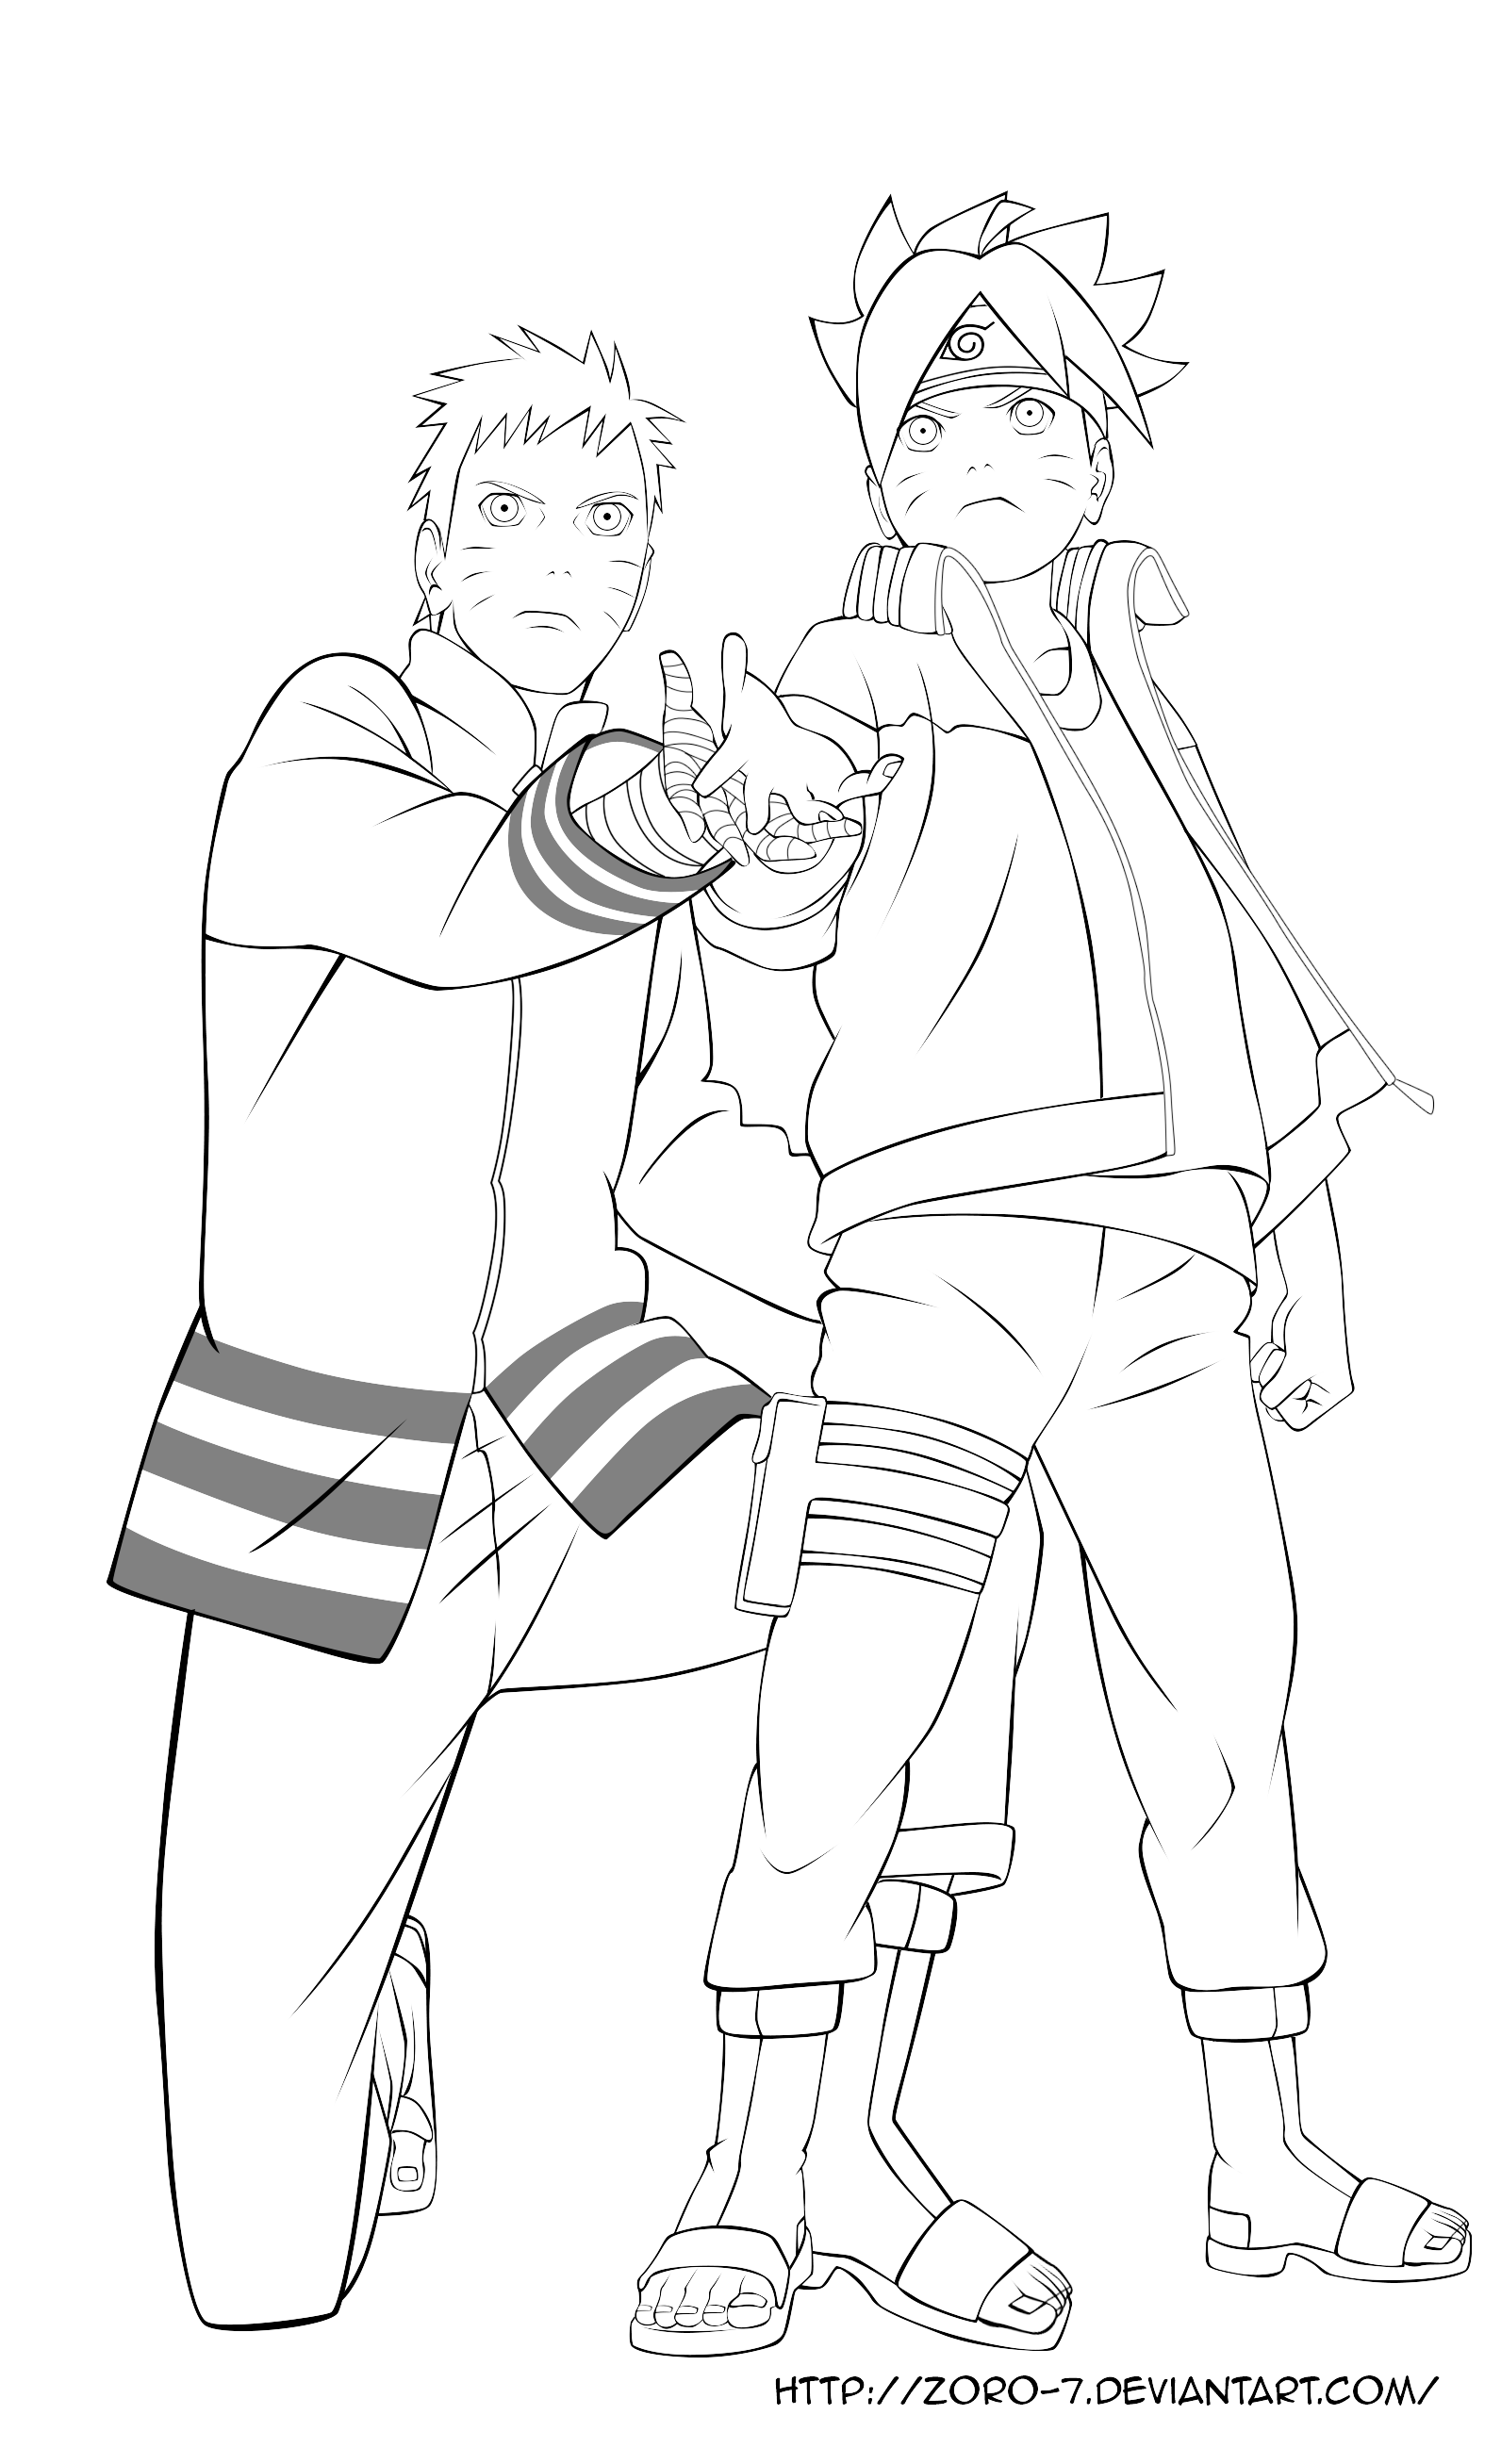 Clip Arts Related To : naruto team 7 coloring pages. view all Naruto Colori...